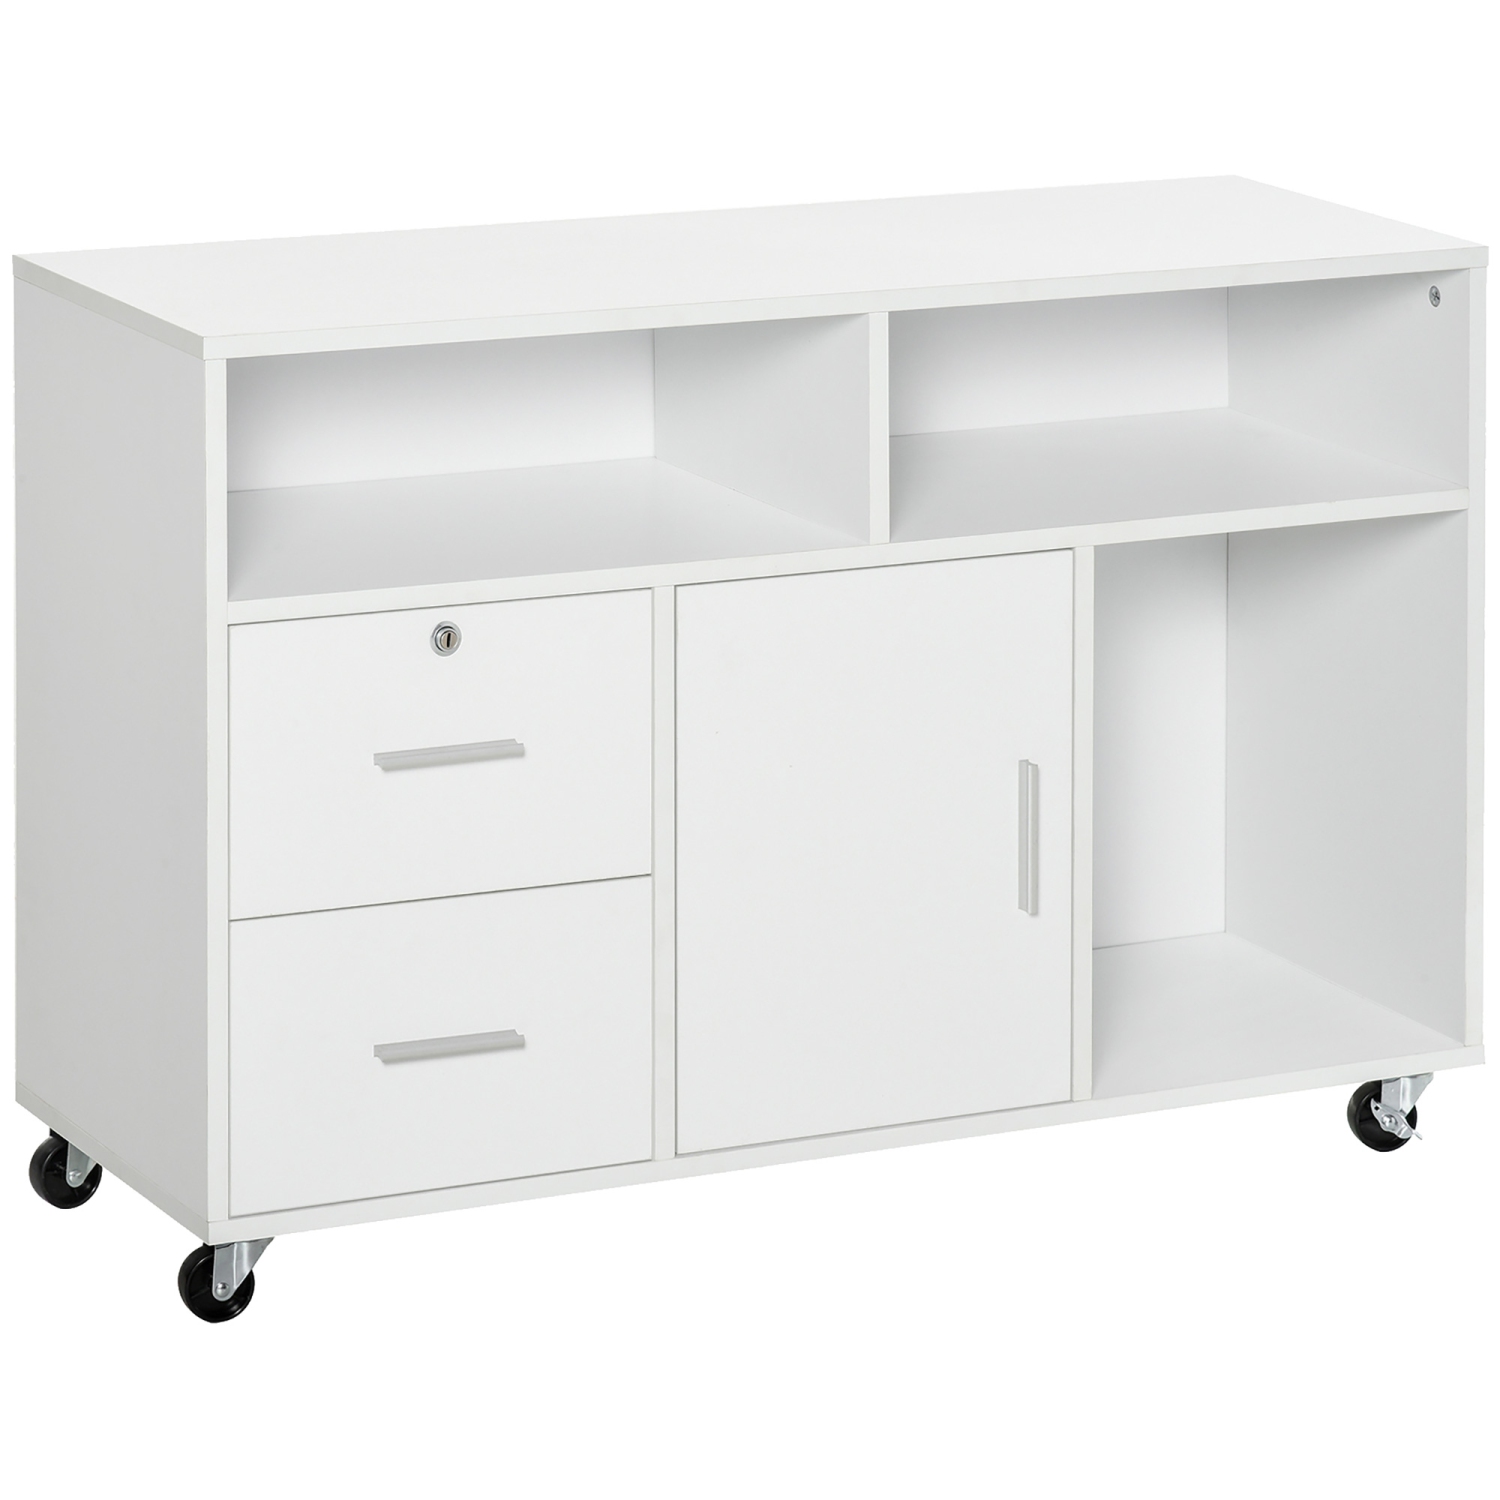 HOMCOM Lateral Filing Cabinet, Printer Stand Home Office Mobile File Cabinet with Wheels, Lockable Drawer, White